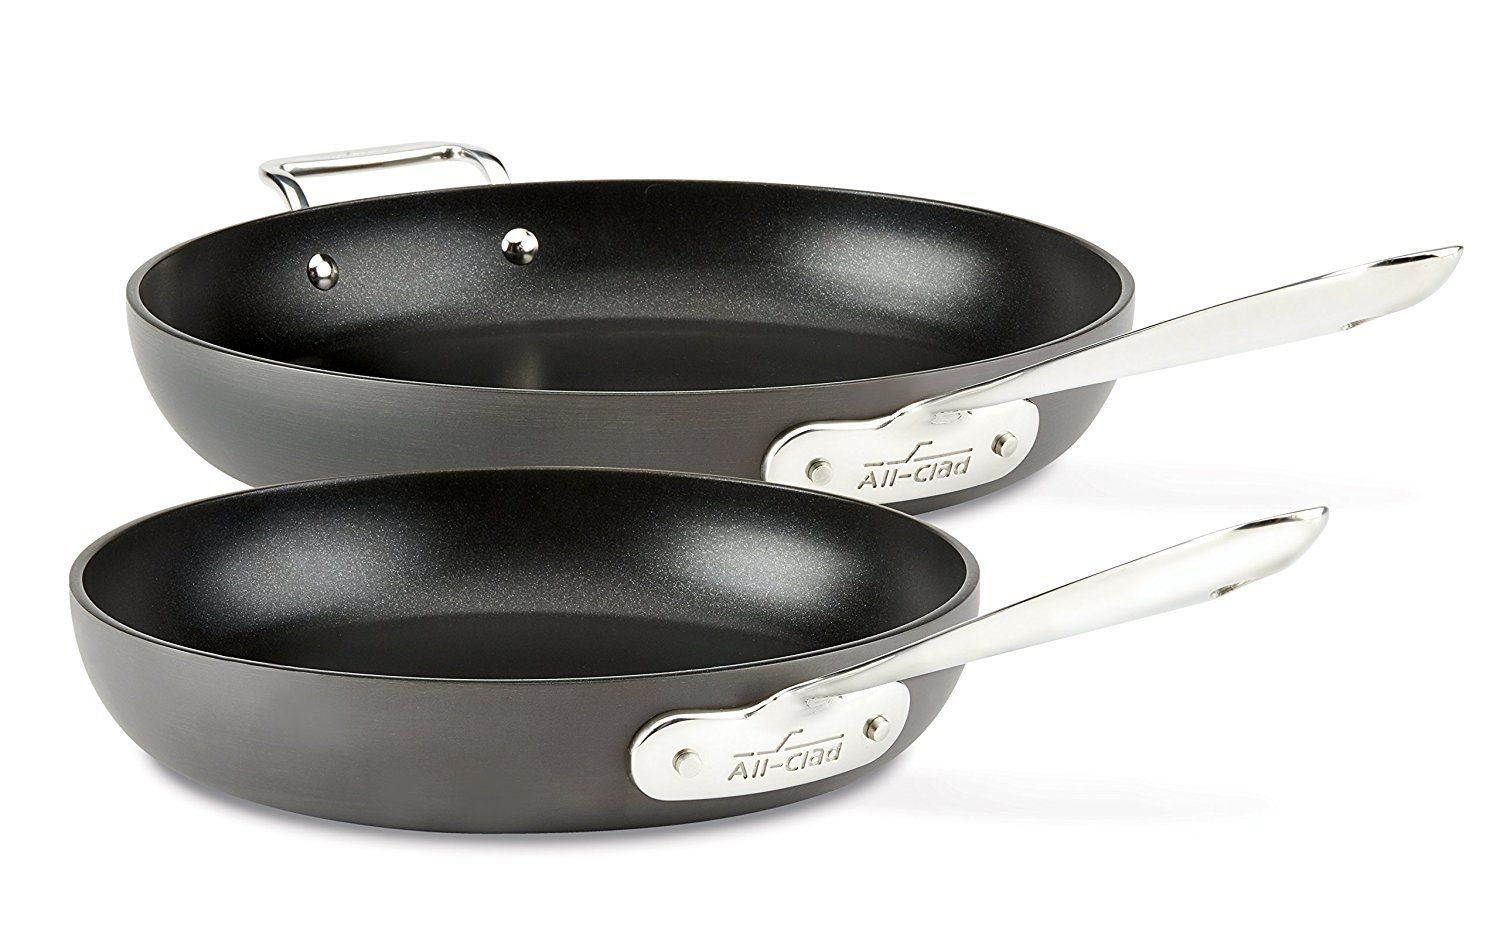 NorPro norpro non stick mini frying pan skillet, 6 inches